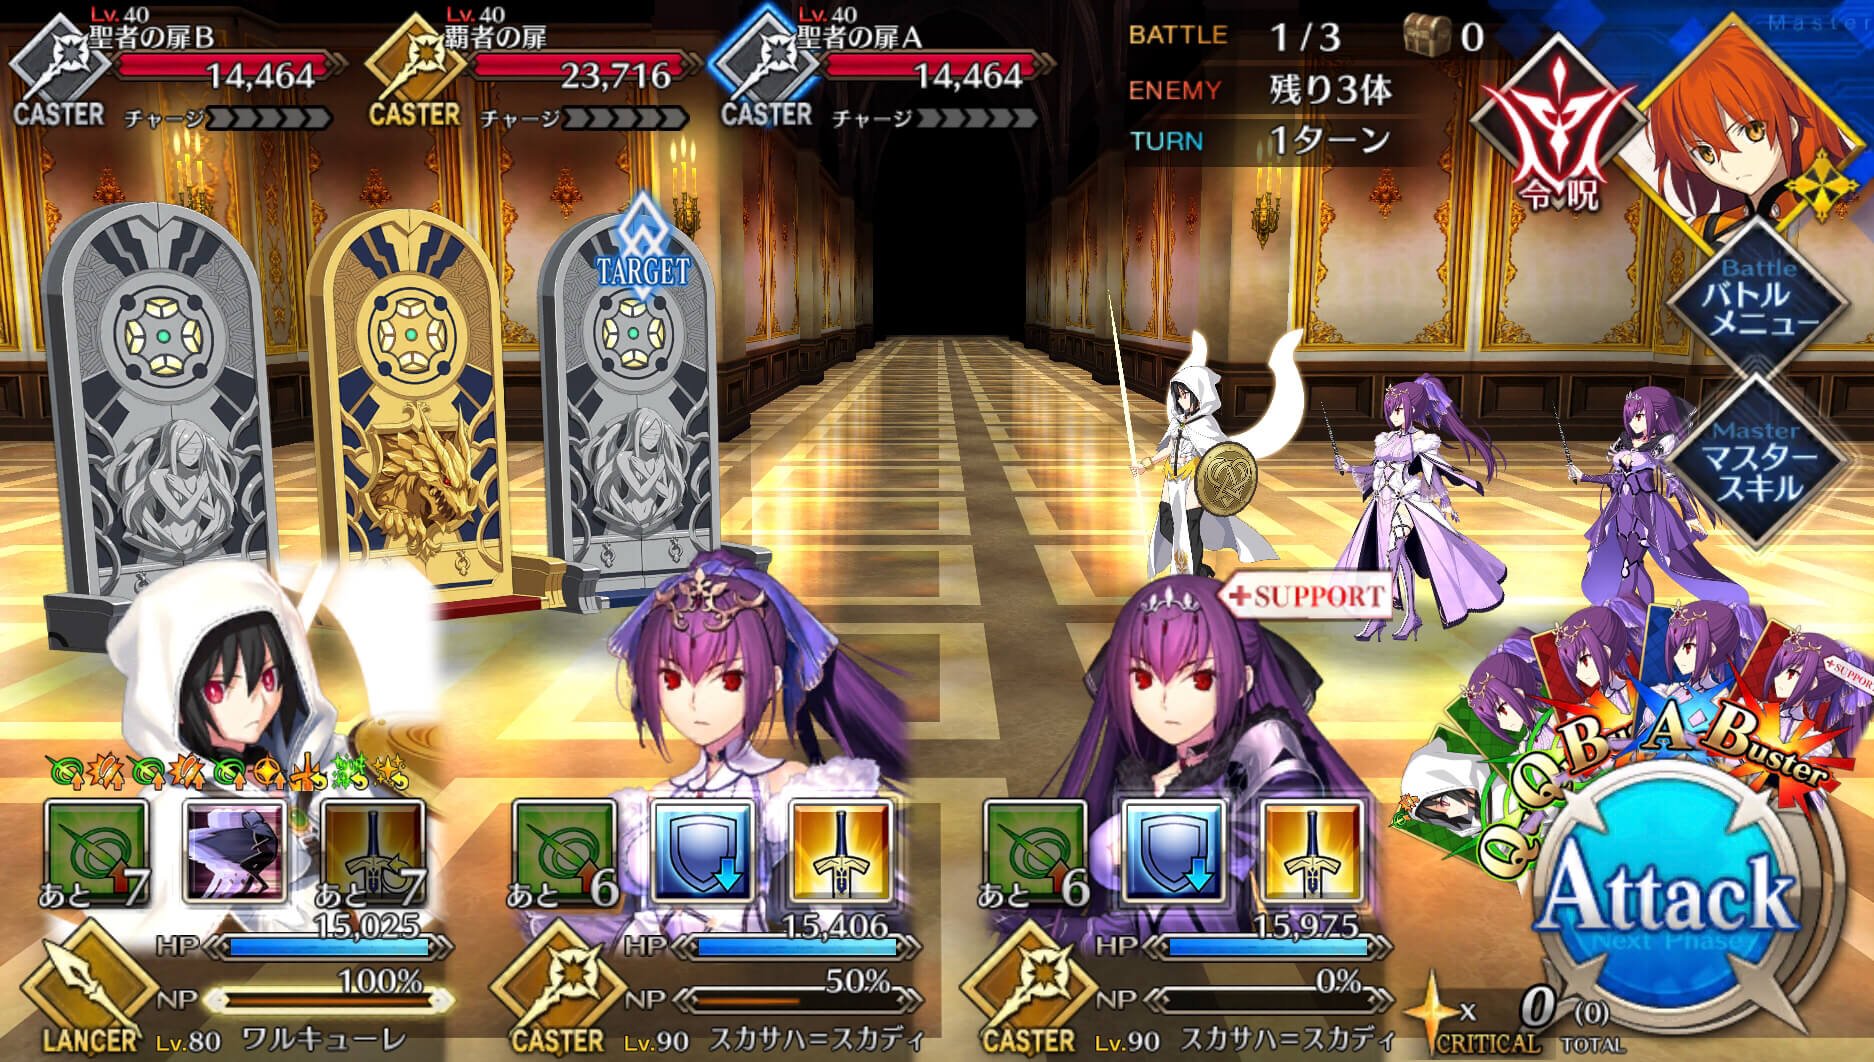 Double Skadi with Best Valkyrie